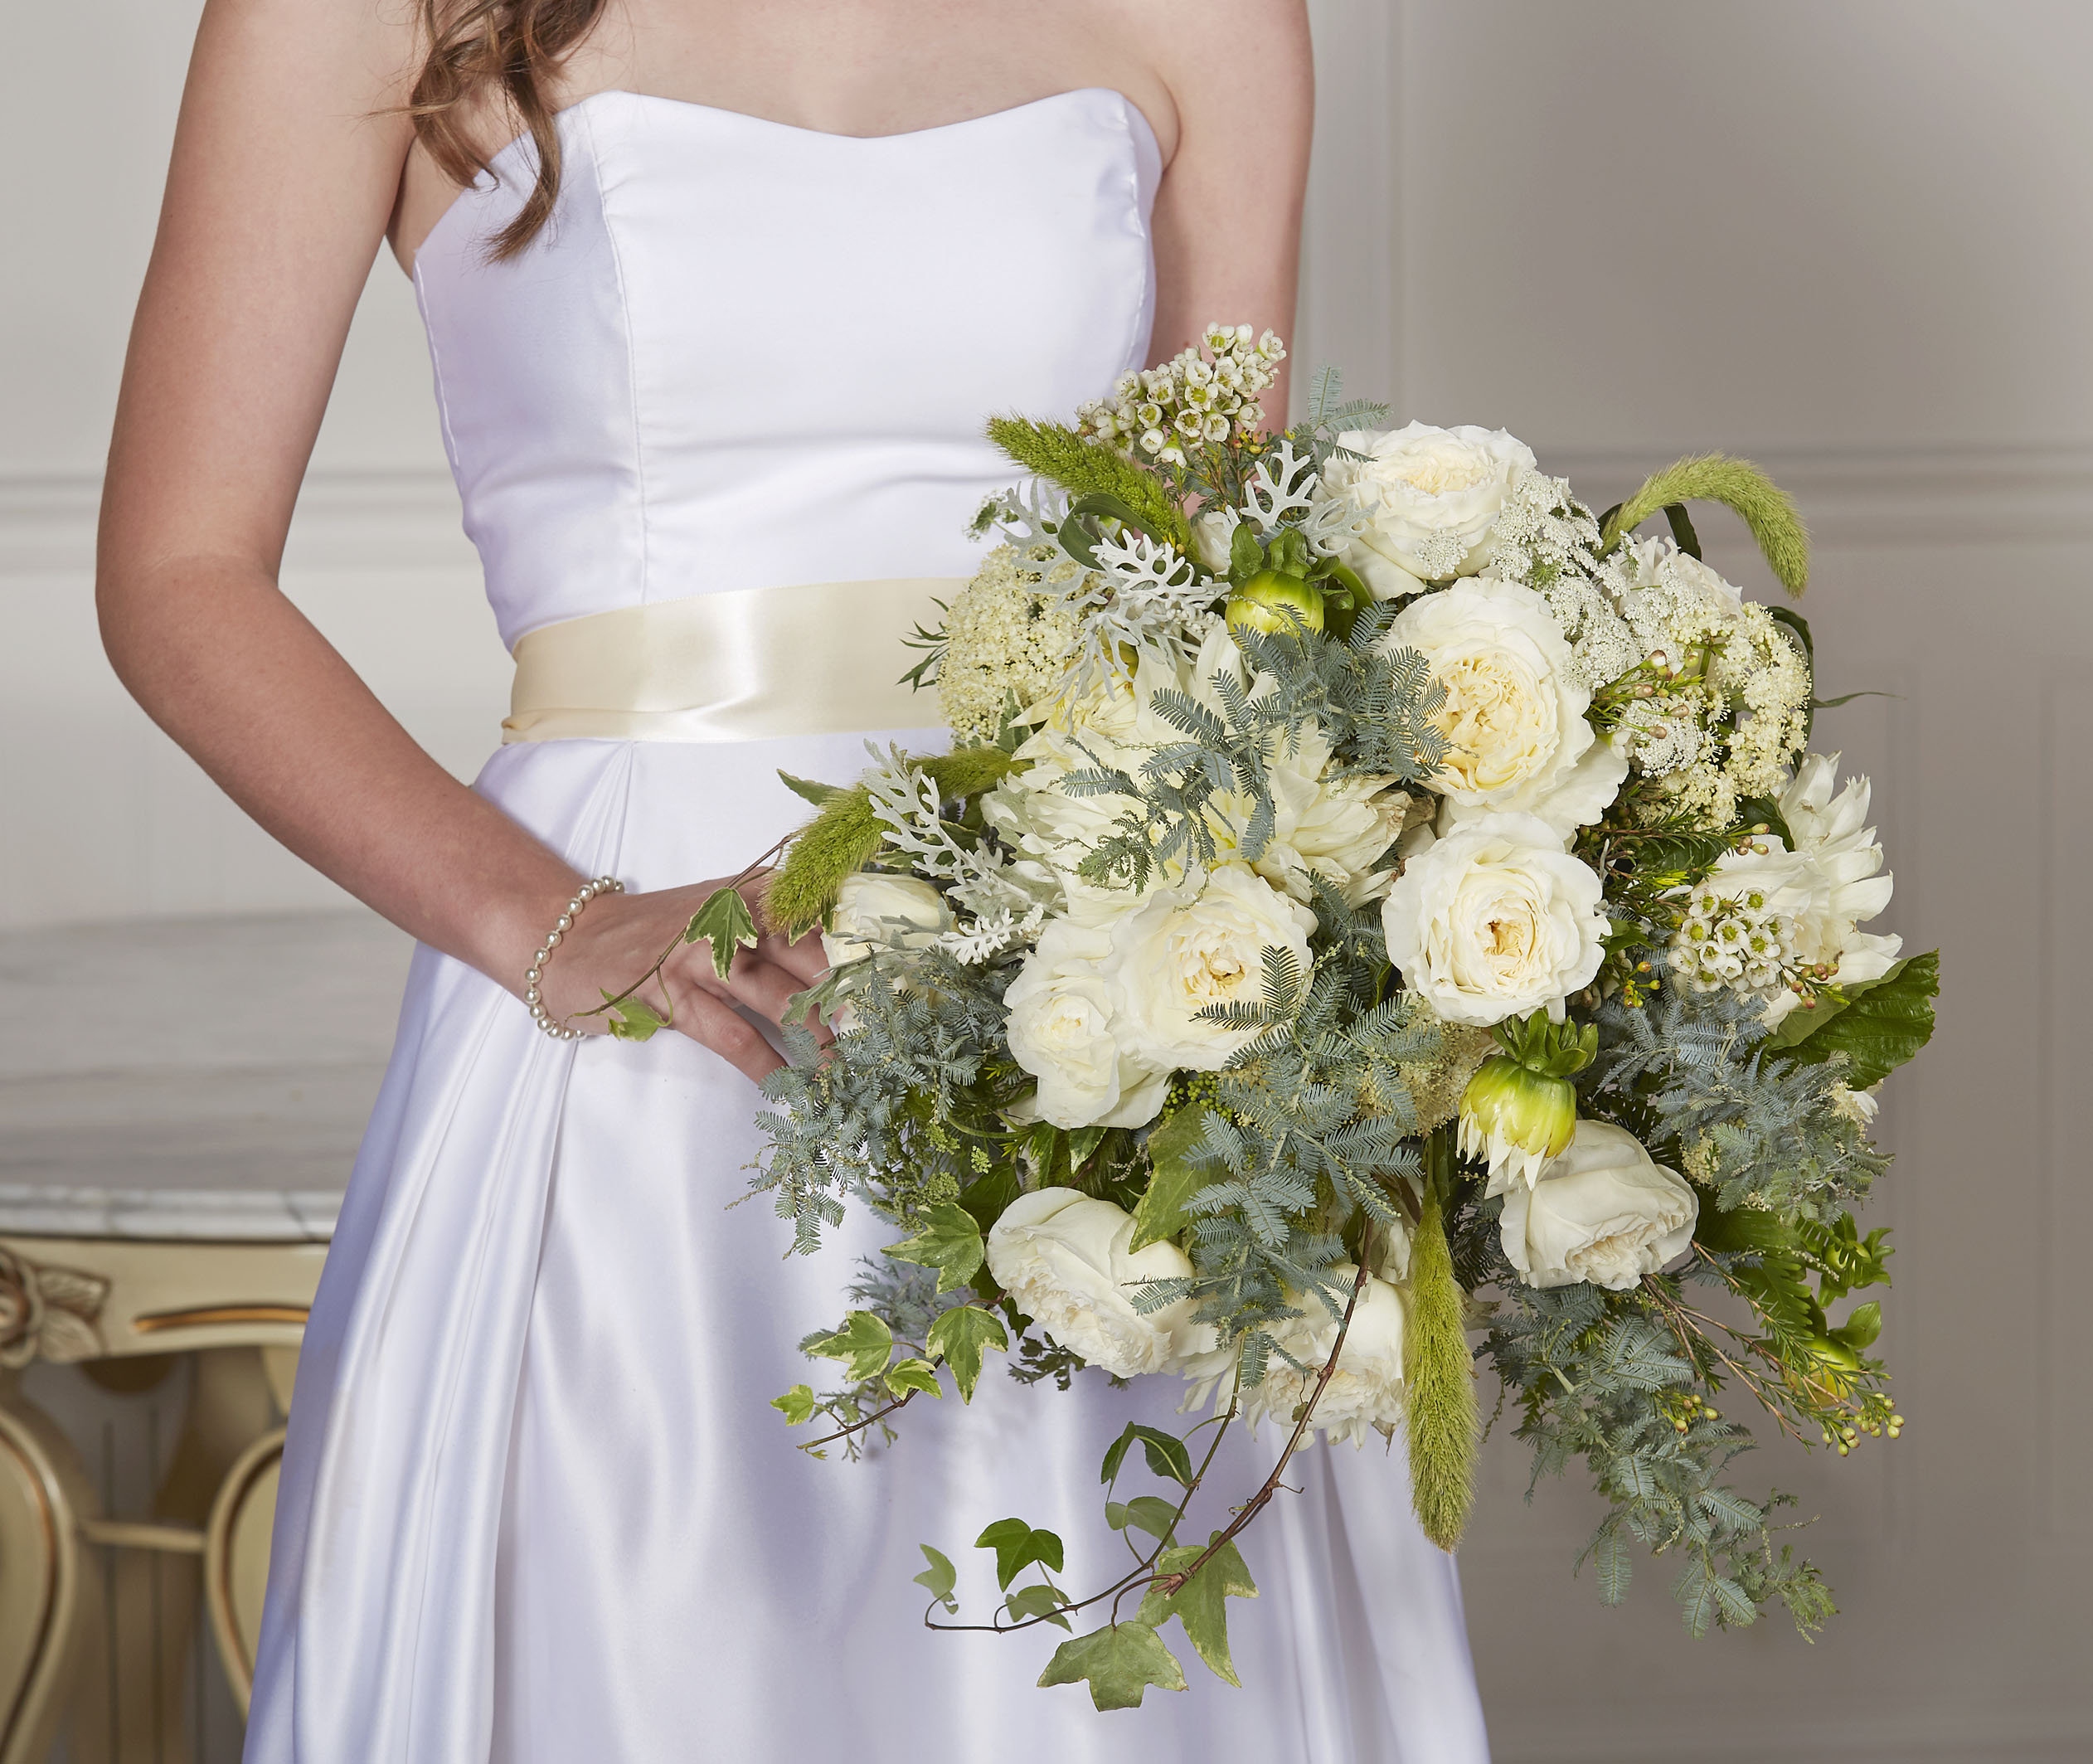 Brides wants floral bouquets that are larger, more freeform, and showcase nature.